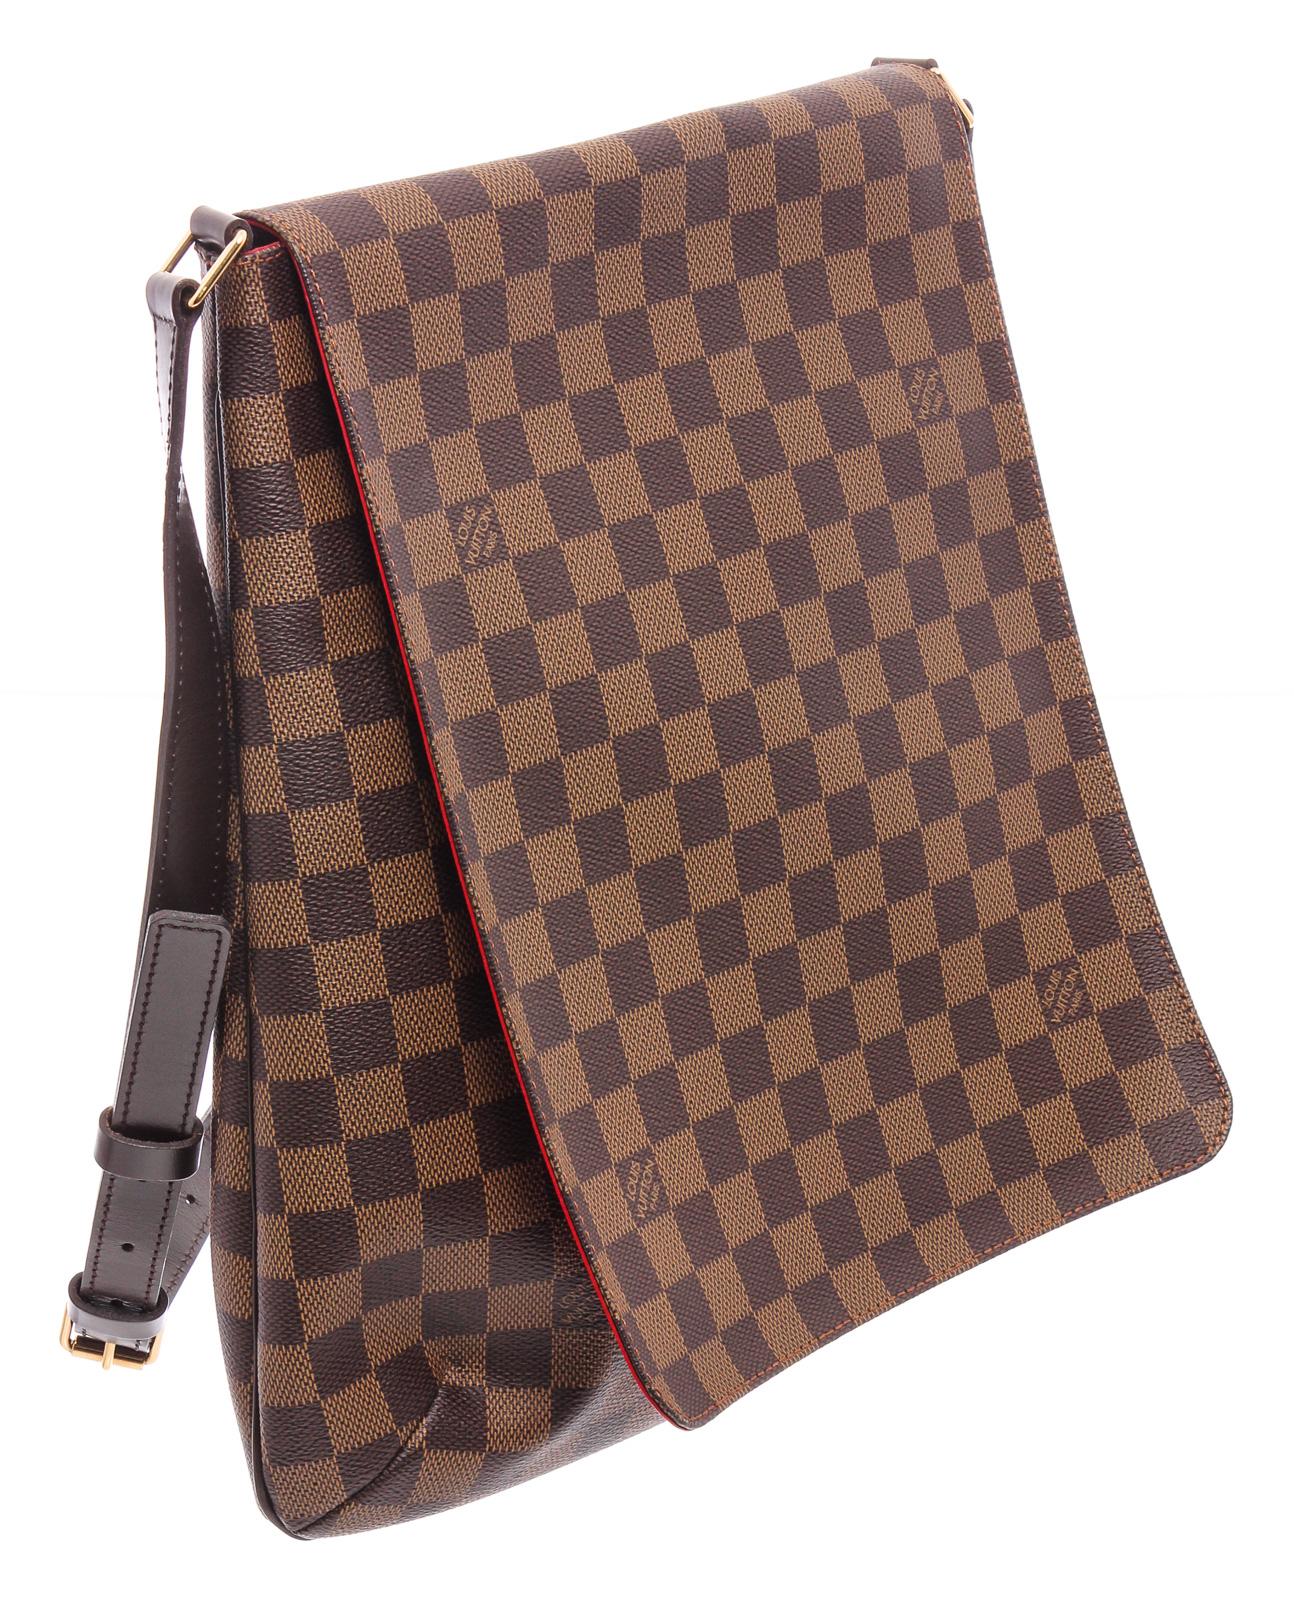 Brown damier ebene coated canvas Louis Vuitton Musette Salsa GM with brass hardware, leather accents, adjustable flat shoulder strap, brown leather alining, single pocket at interior wall and fold-over flap closure at front.

22139MSC MLA